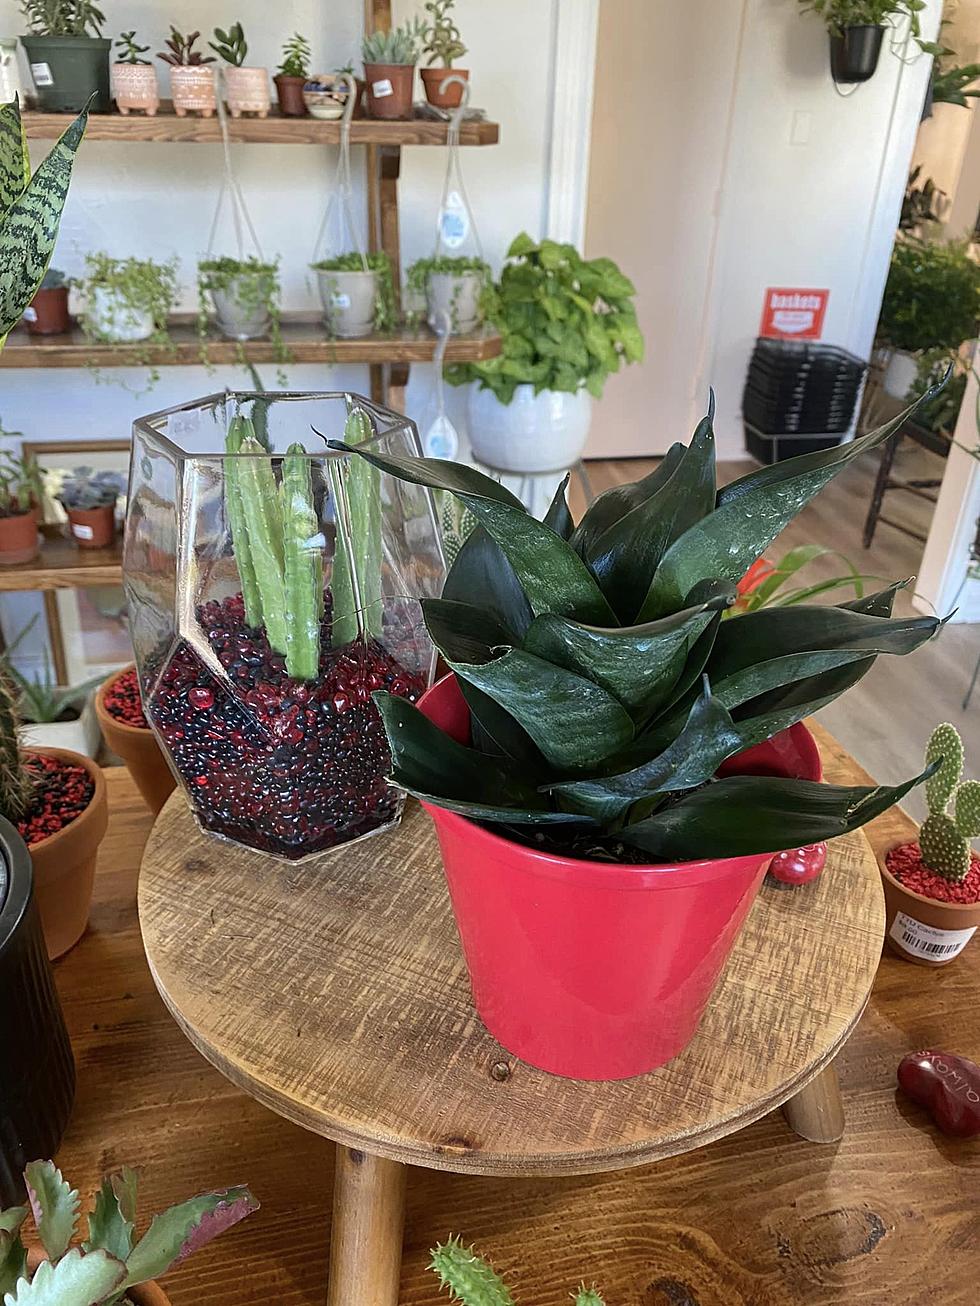 Locally Owned Lubbock Plant Shop Offering Unique Workshops For All Ages